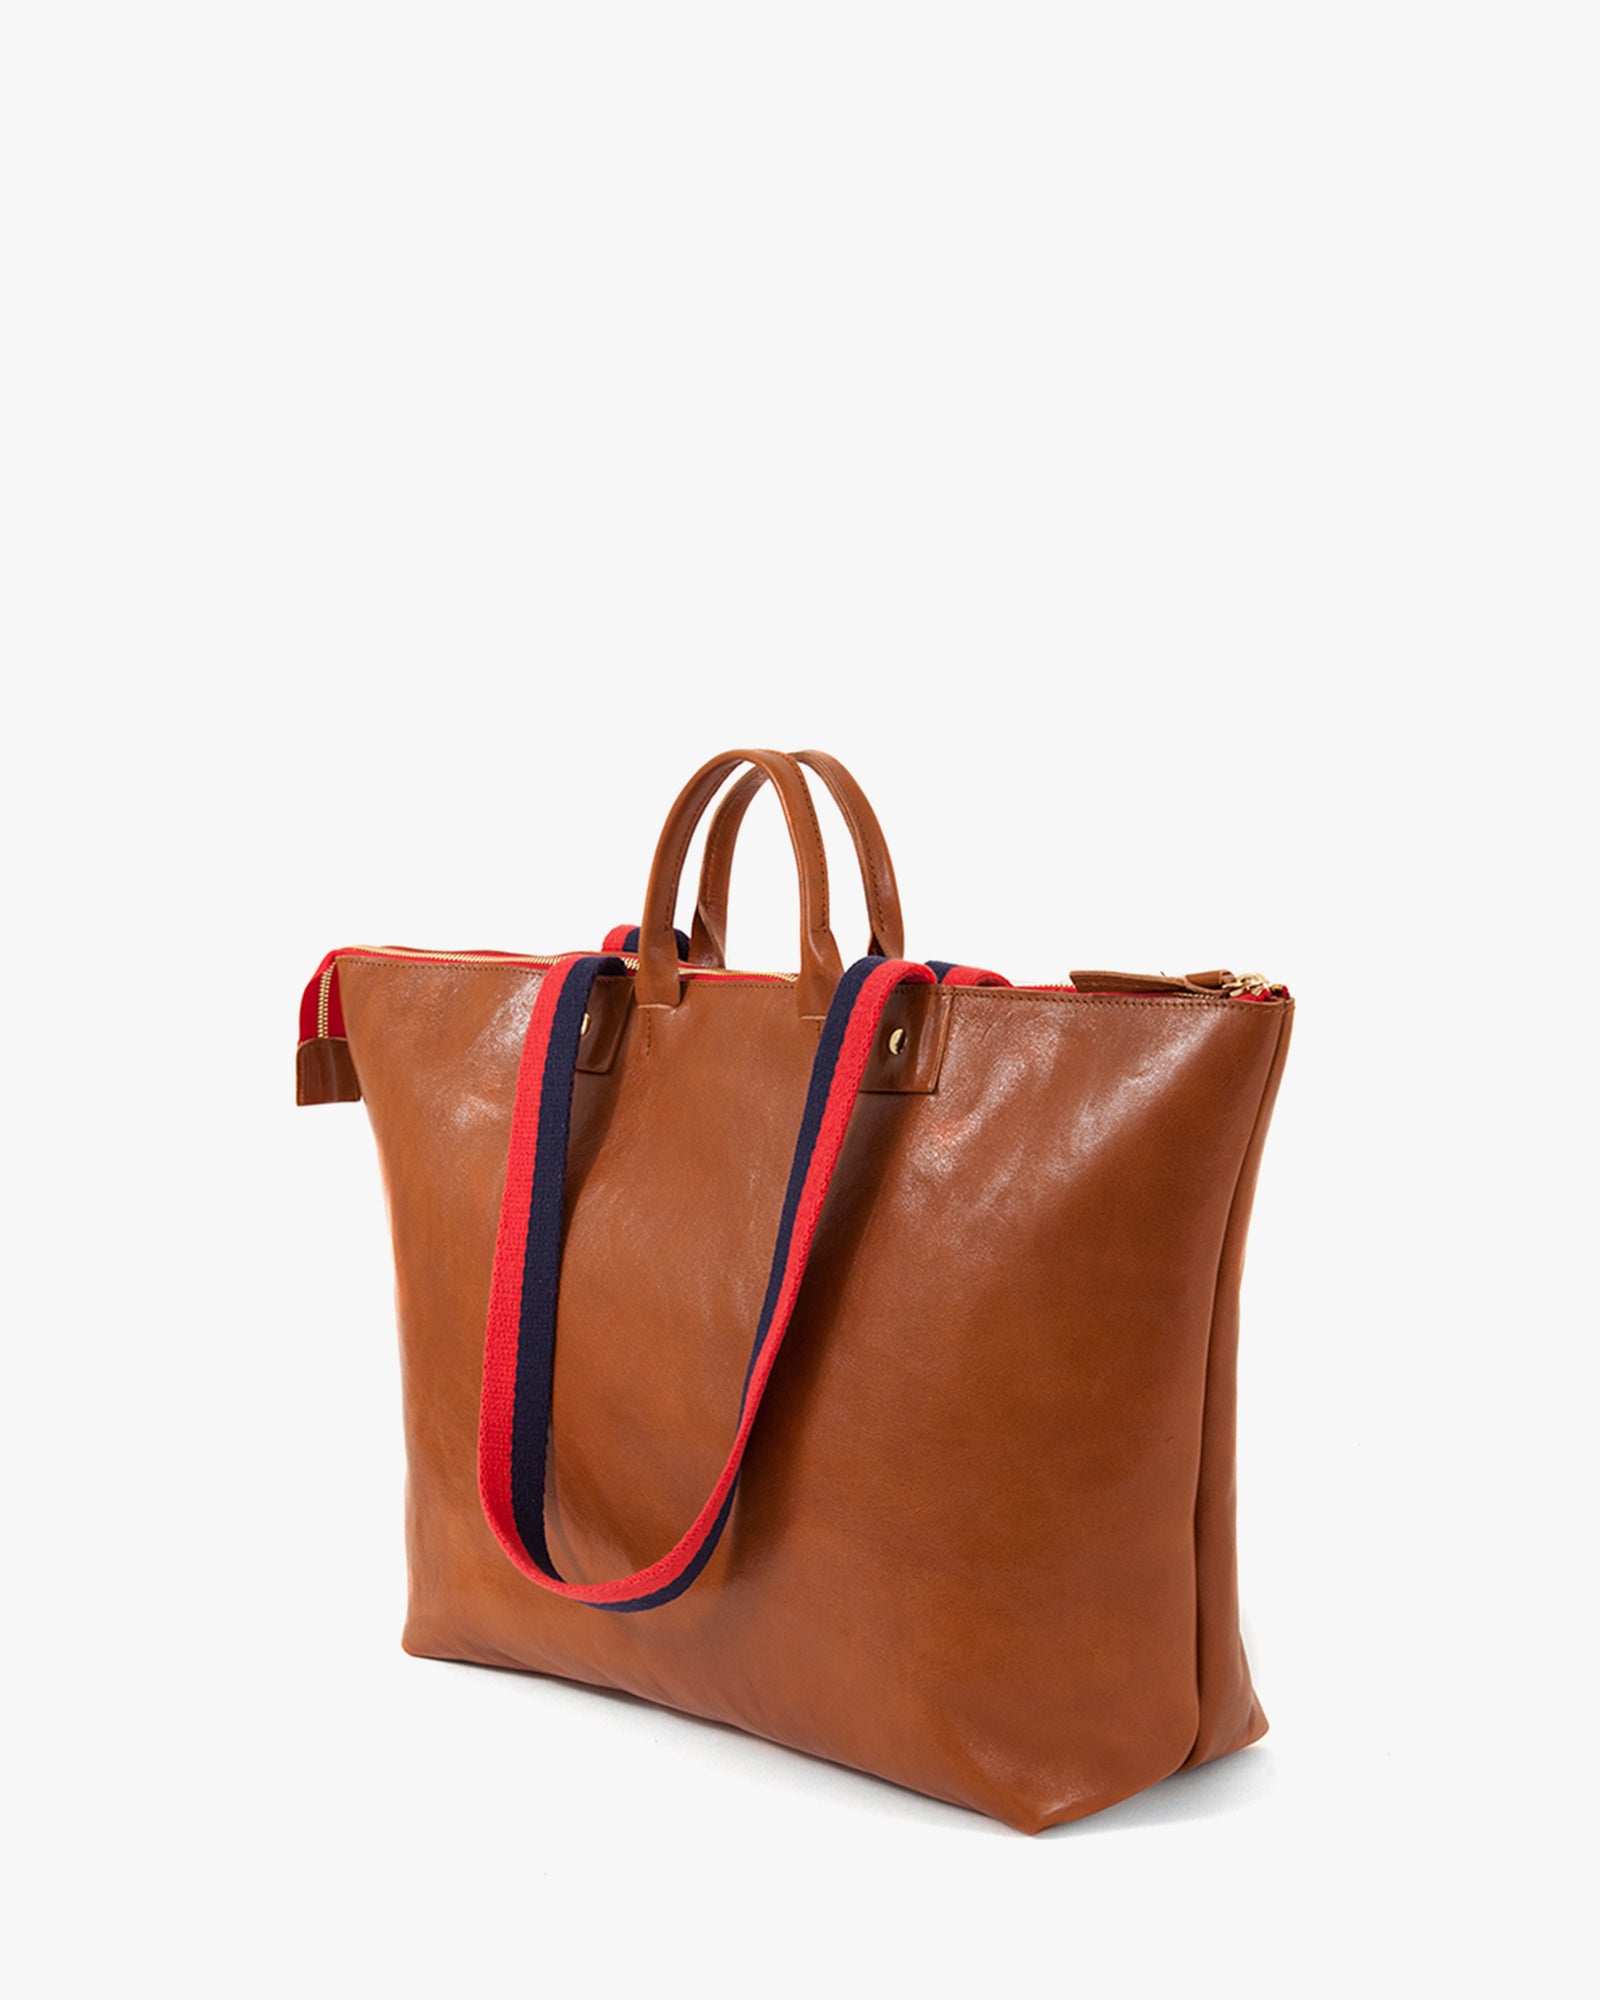 Back Flat of the Le Zip Sac in Miel Rustic